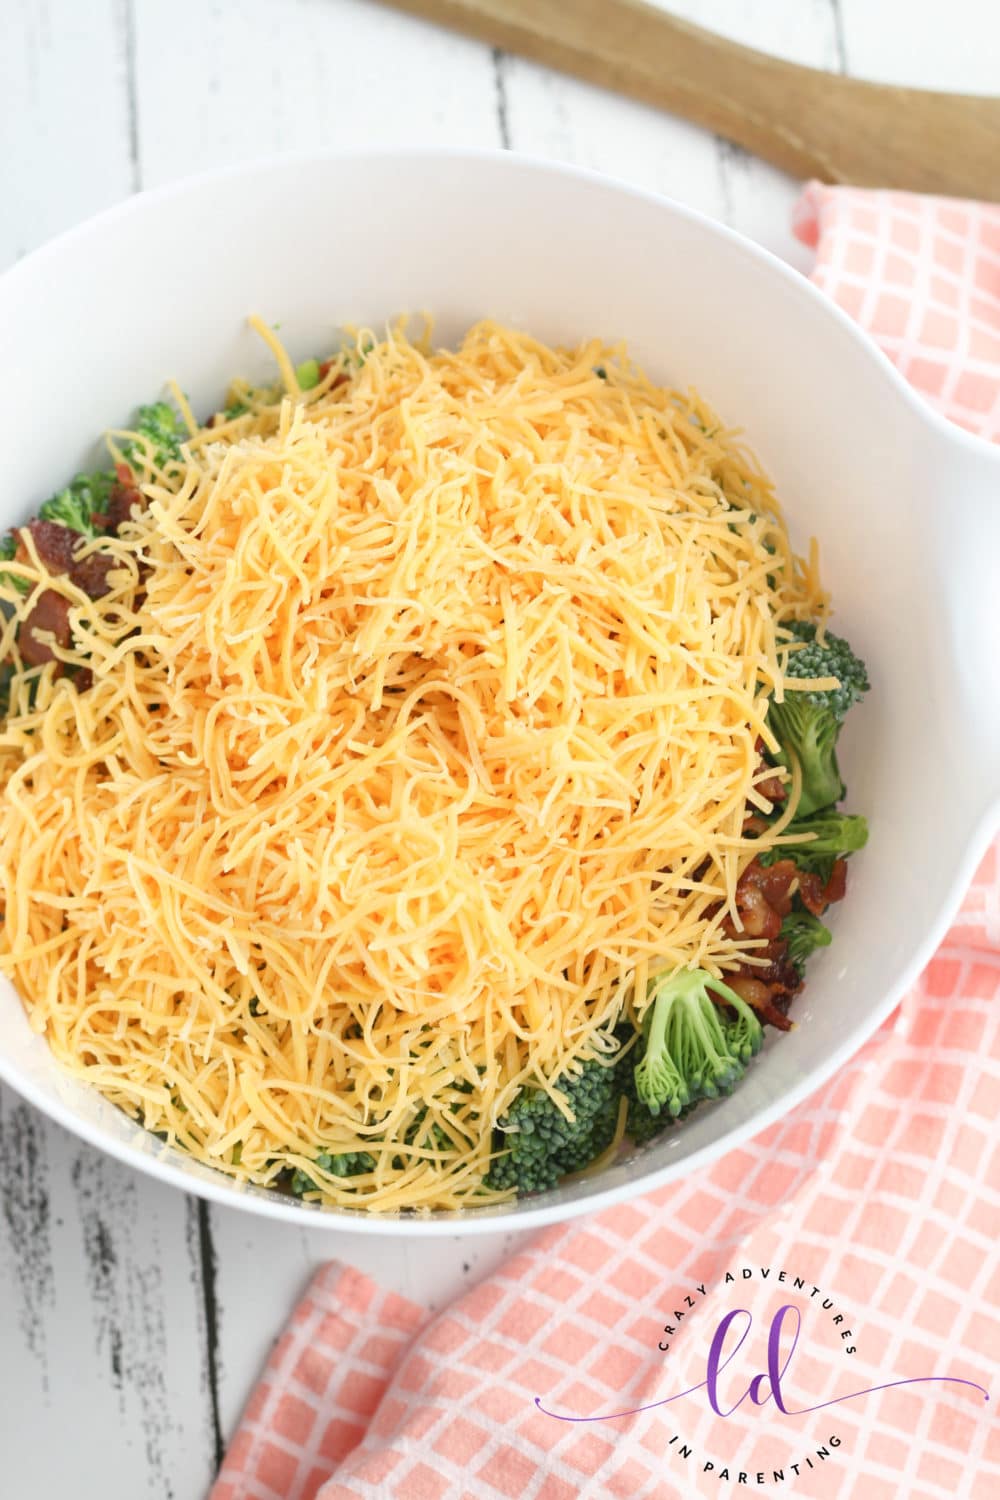 Generously Add Shredded Cheese for Easy Broccoli Salad with Bacon